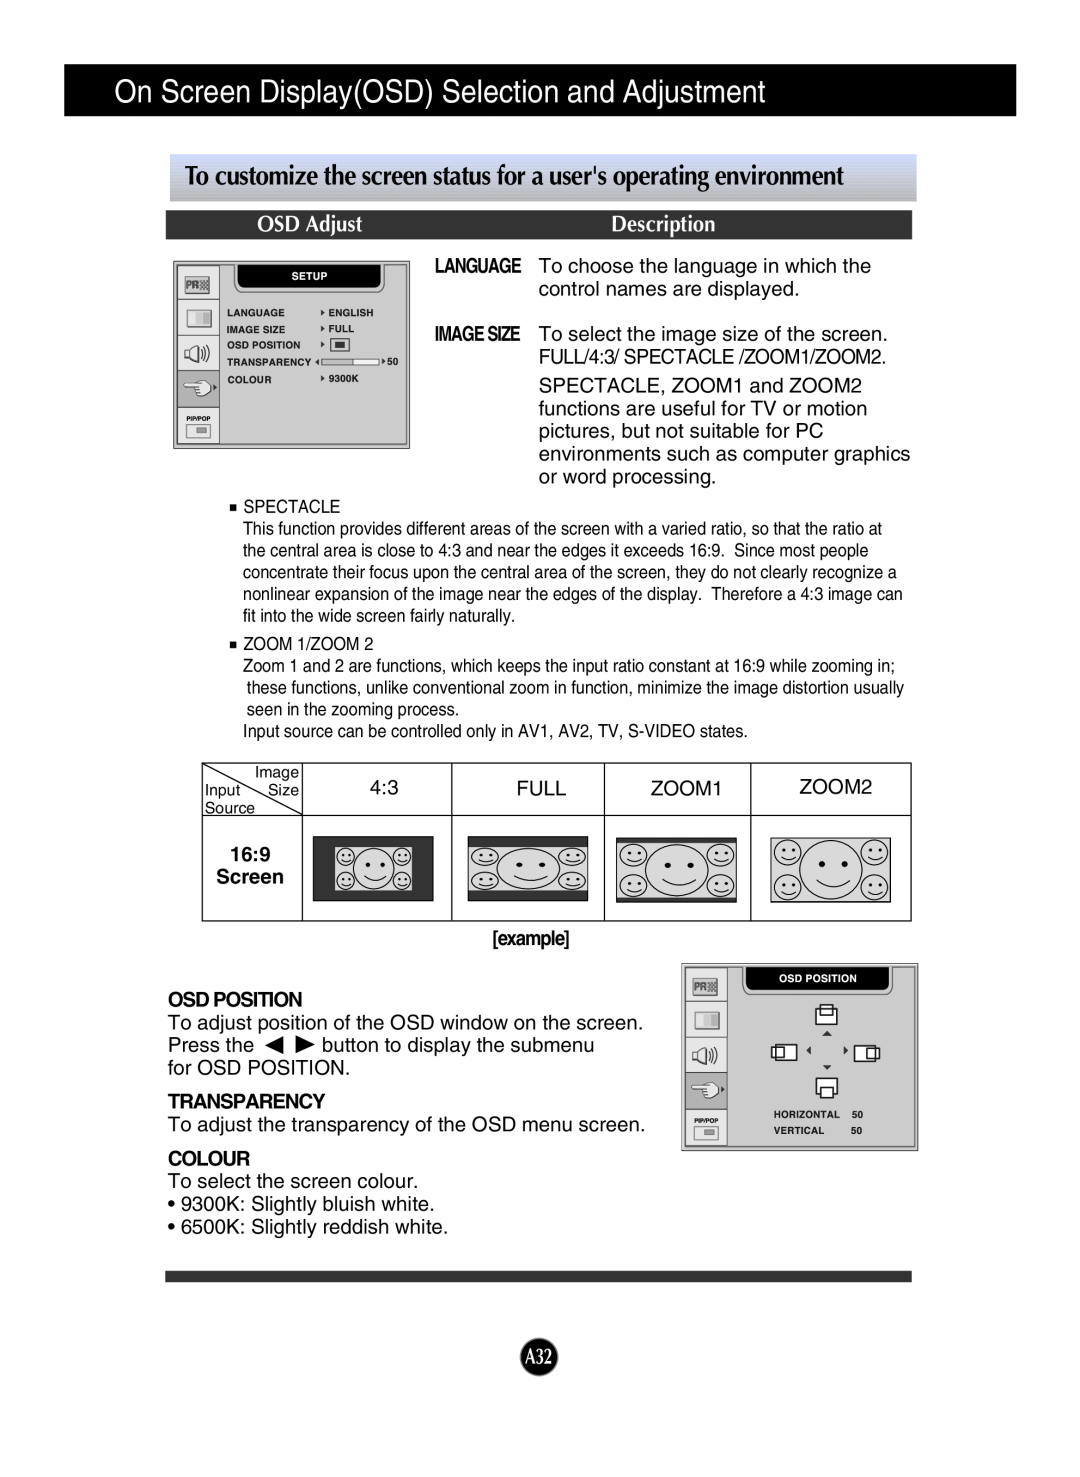 LG Electronics L2323T manual On Screen DisplayOSD Selection and Adjustment, OSD Adjust, Description, example, Osd Position 